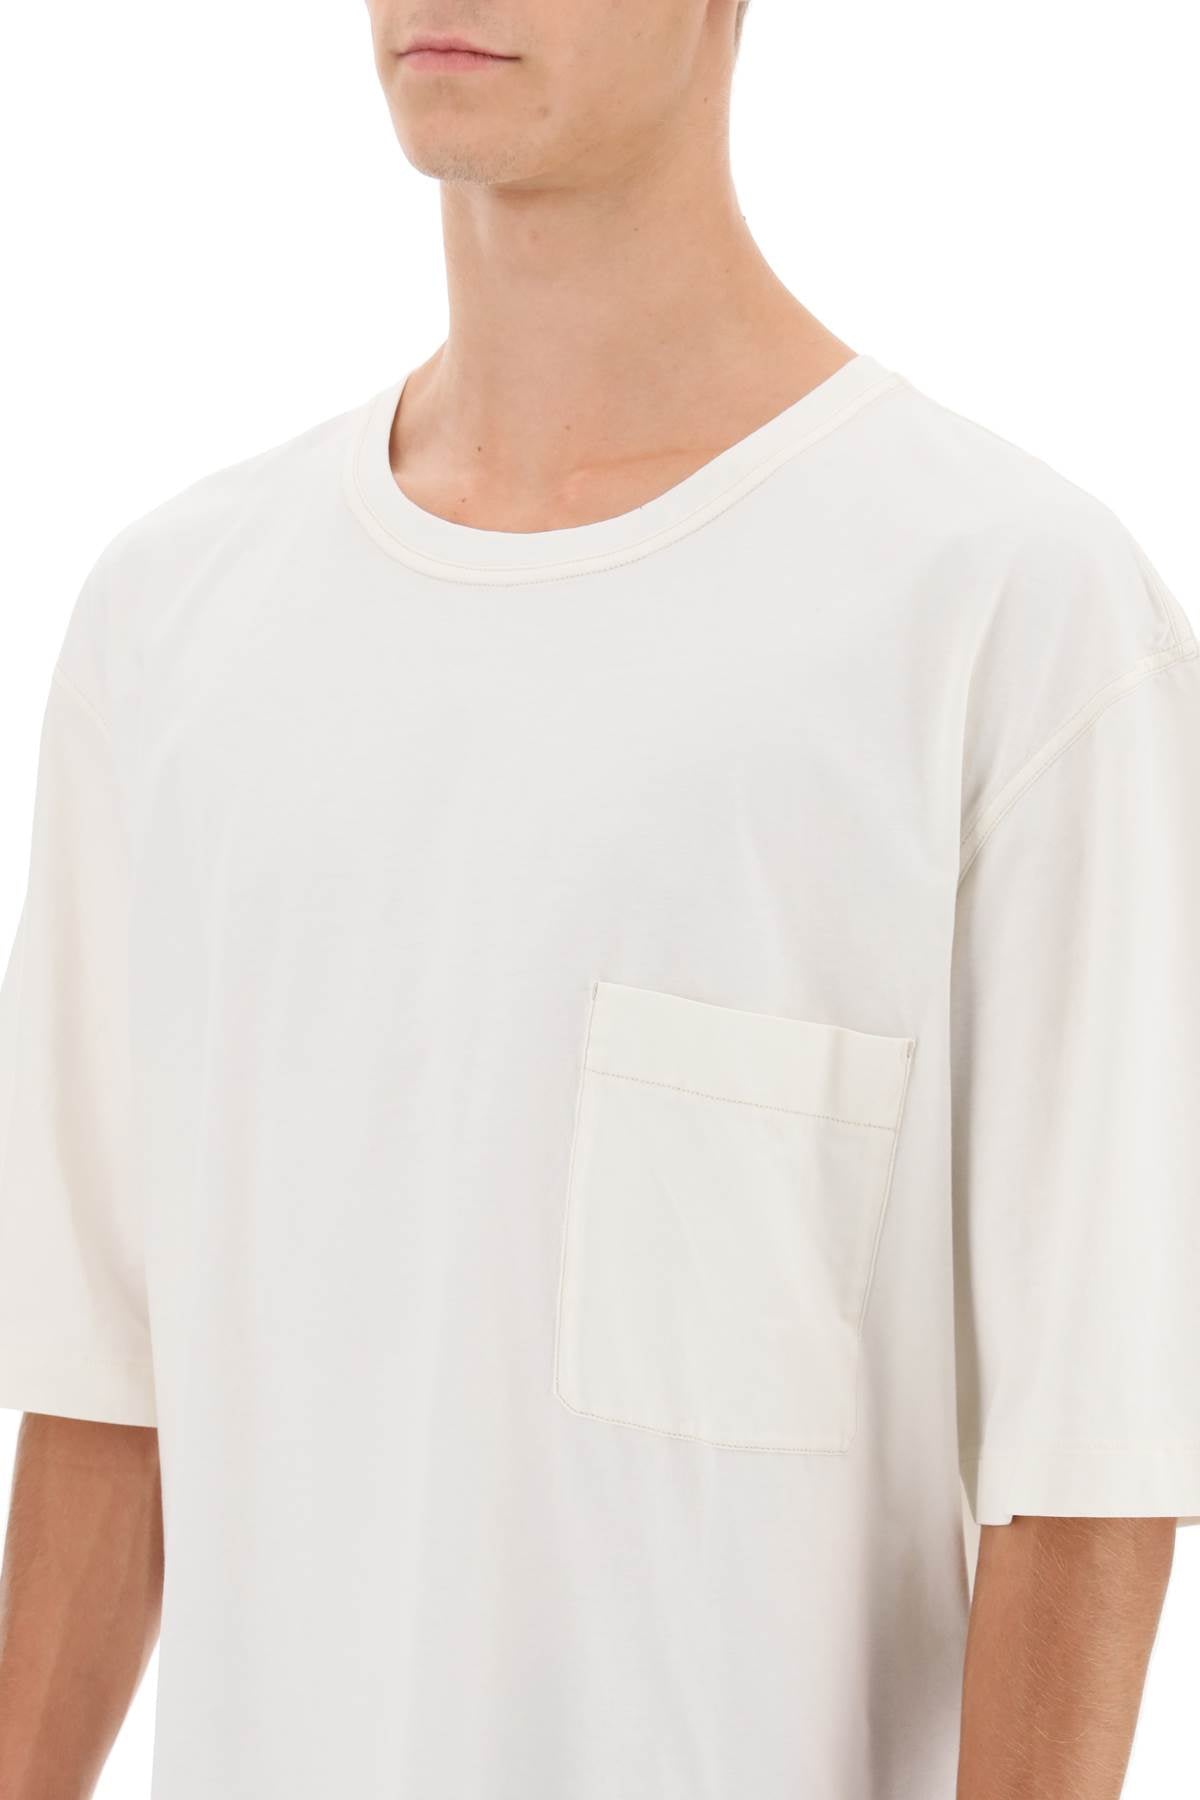 Lemaire Lemaire oversized t-shirt with patch pocket